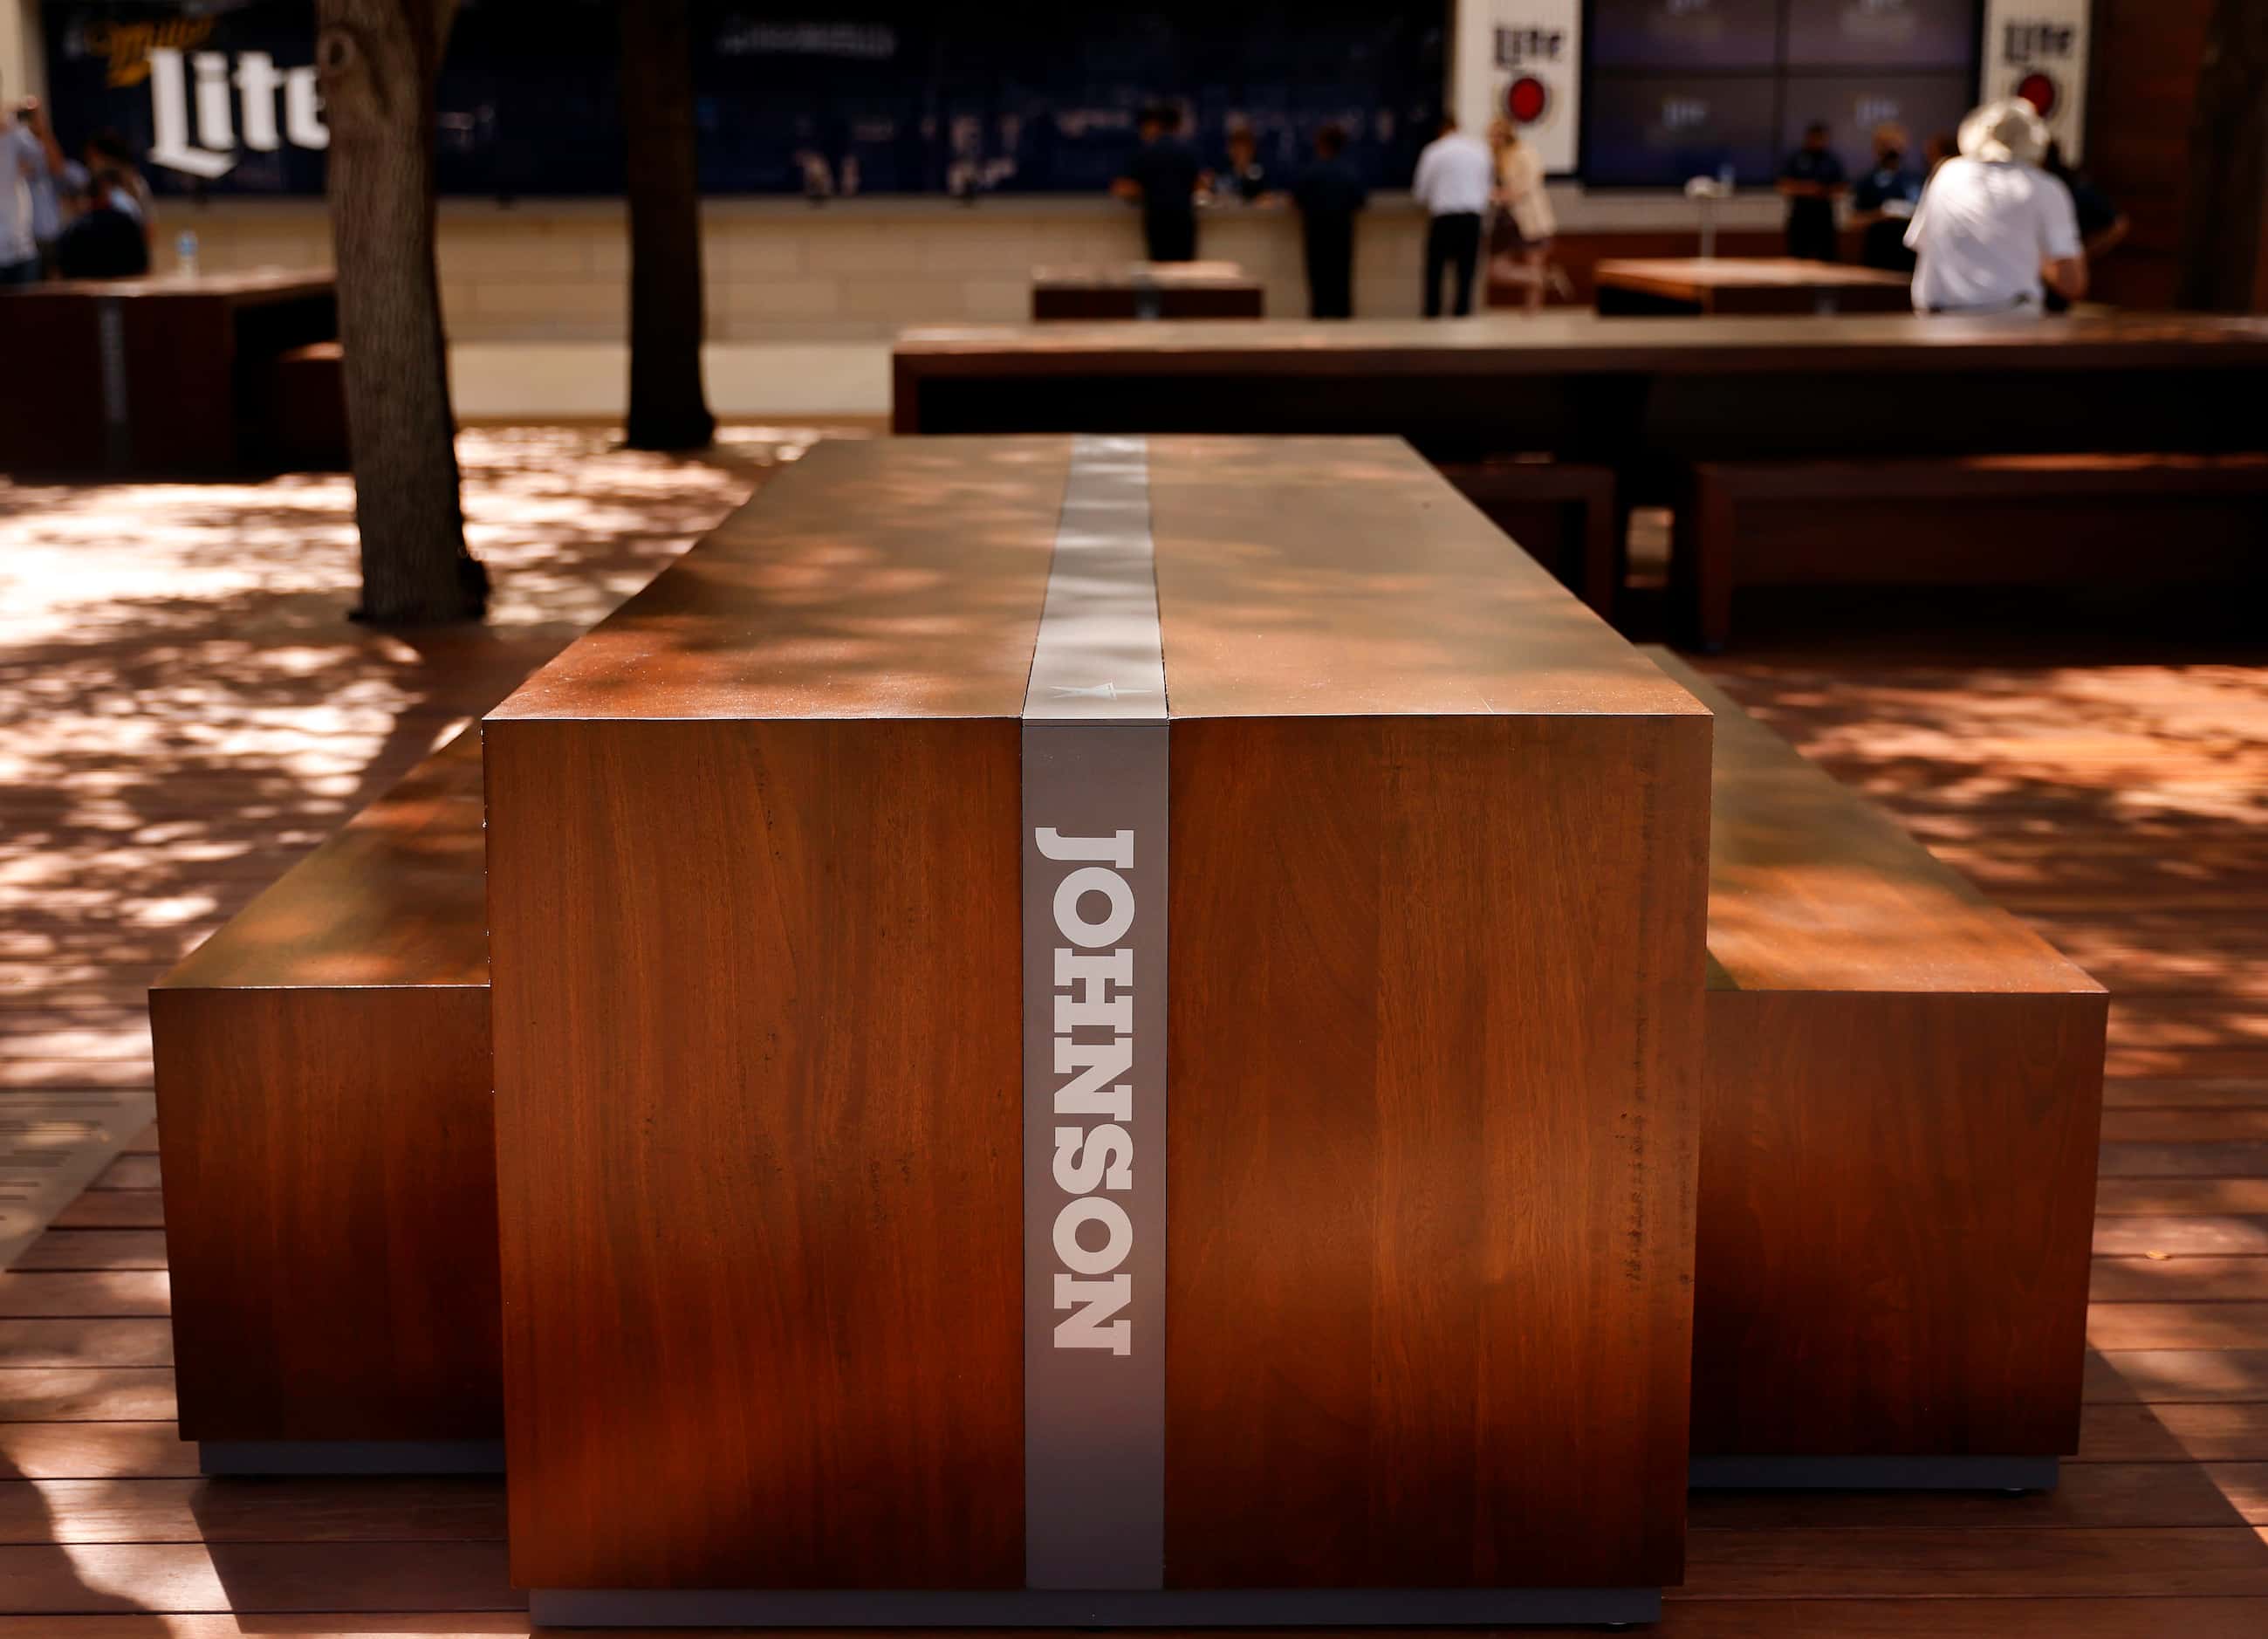 Wood tables are named for the Dallas Cowboys Ring of Honor members, including future member...